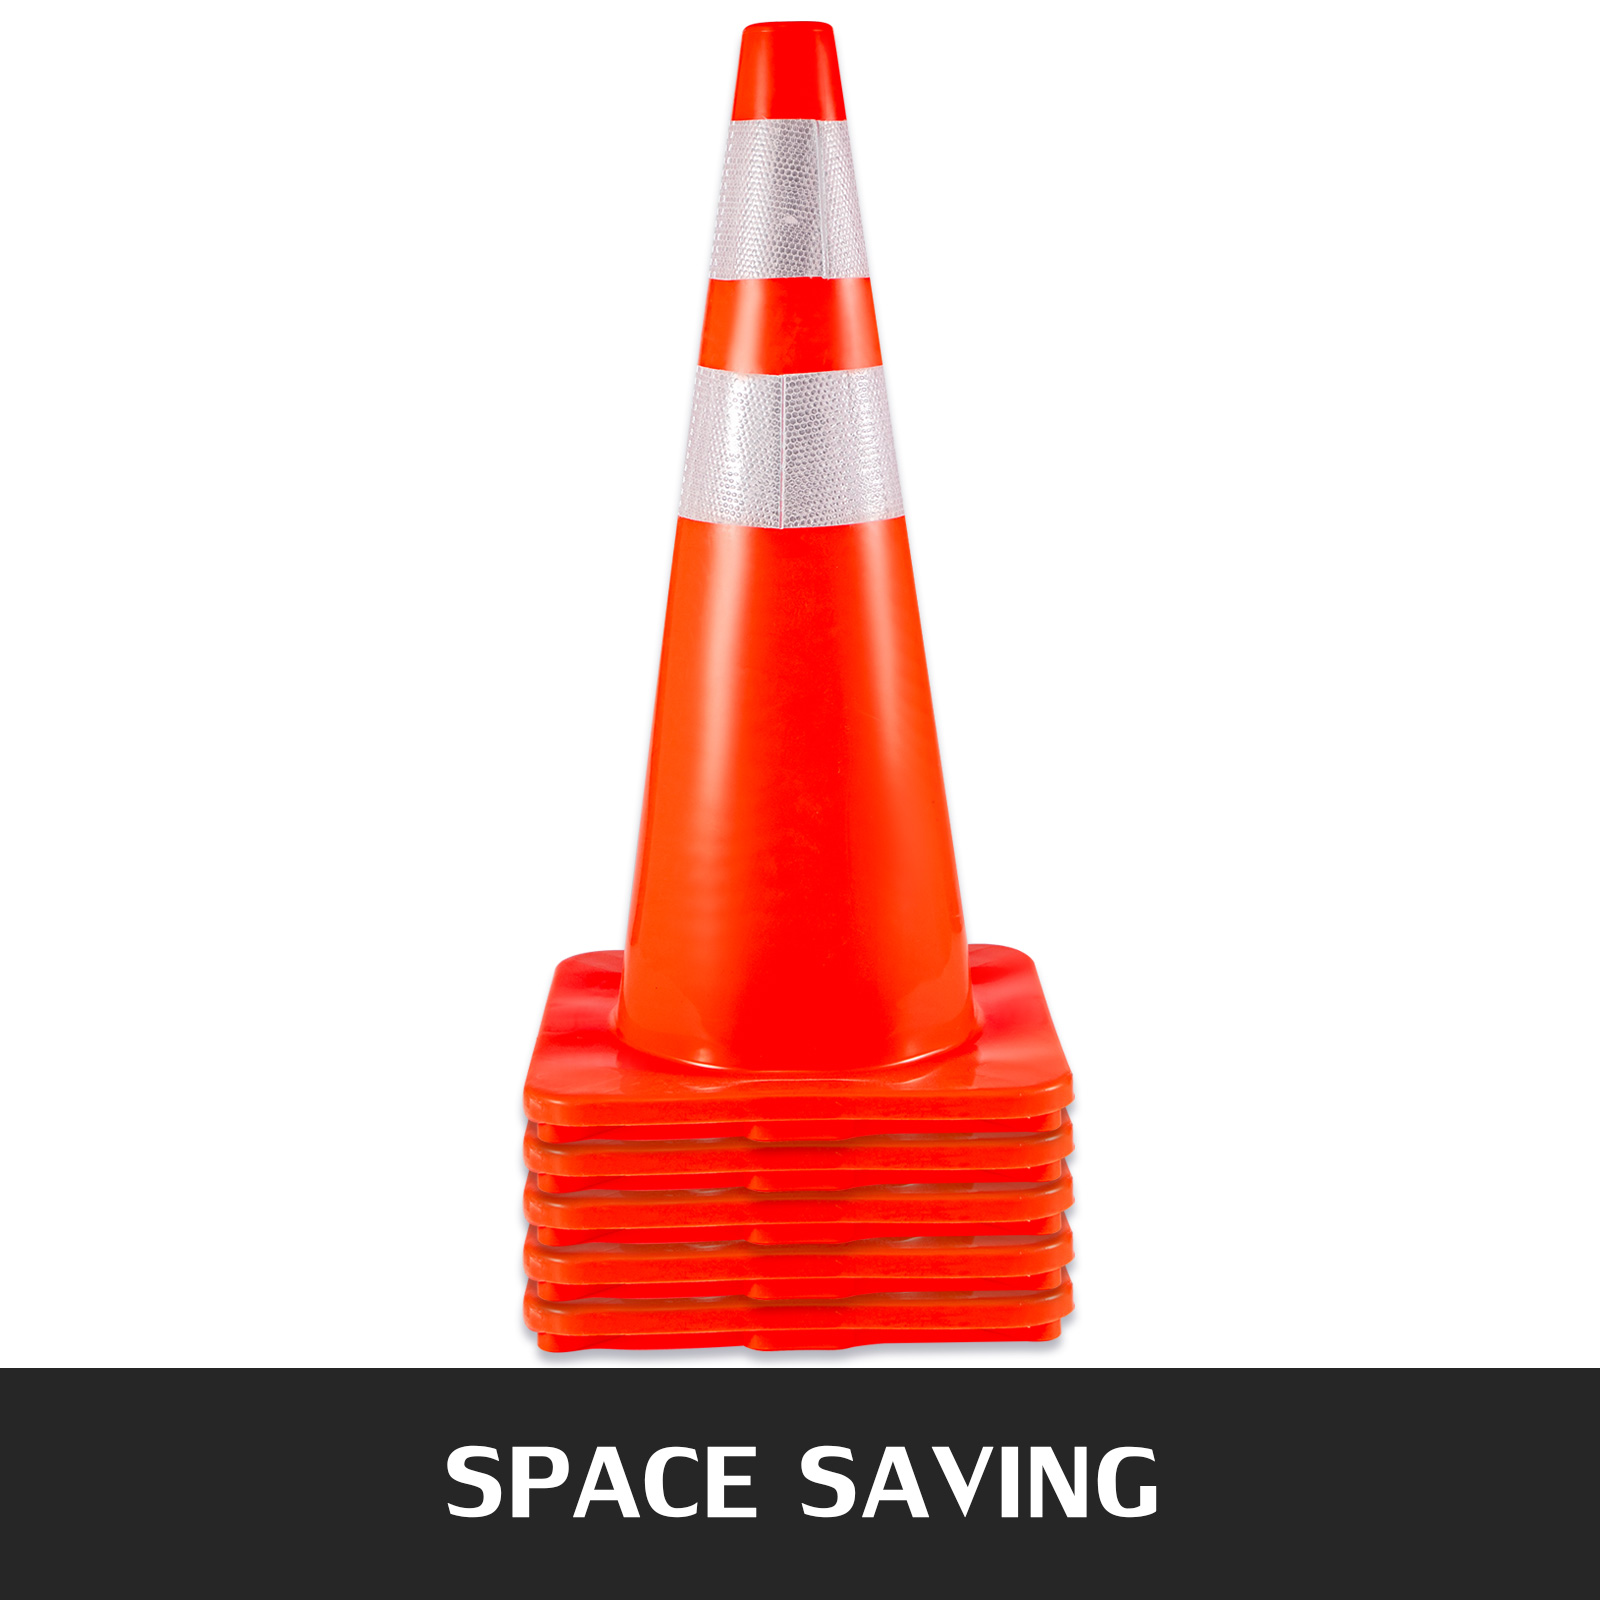 Details about   Traffic Cones Safety Cones Parking Cones Warning Roads Construction Sites